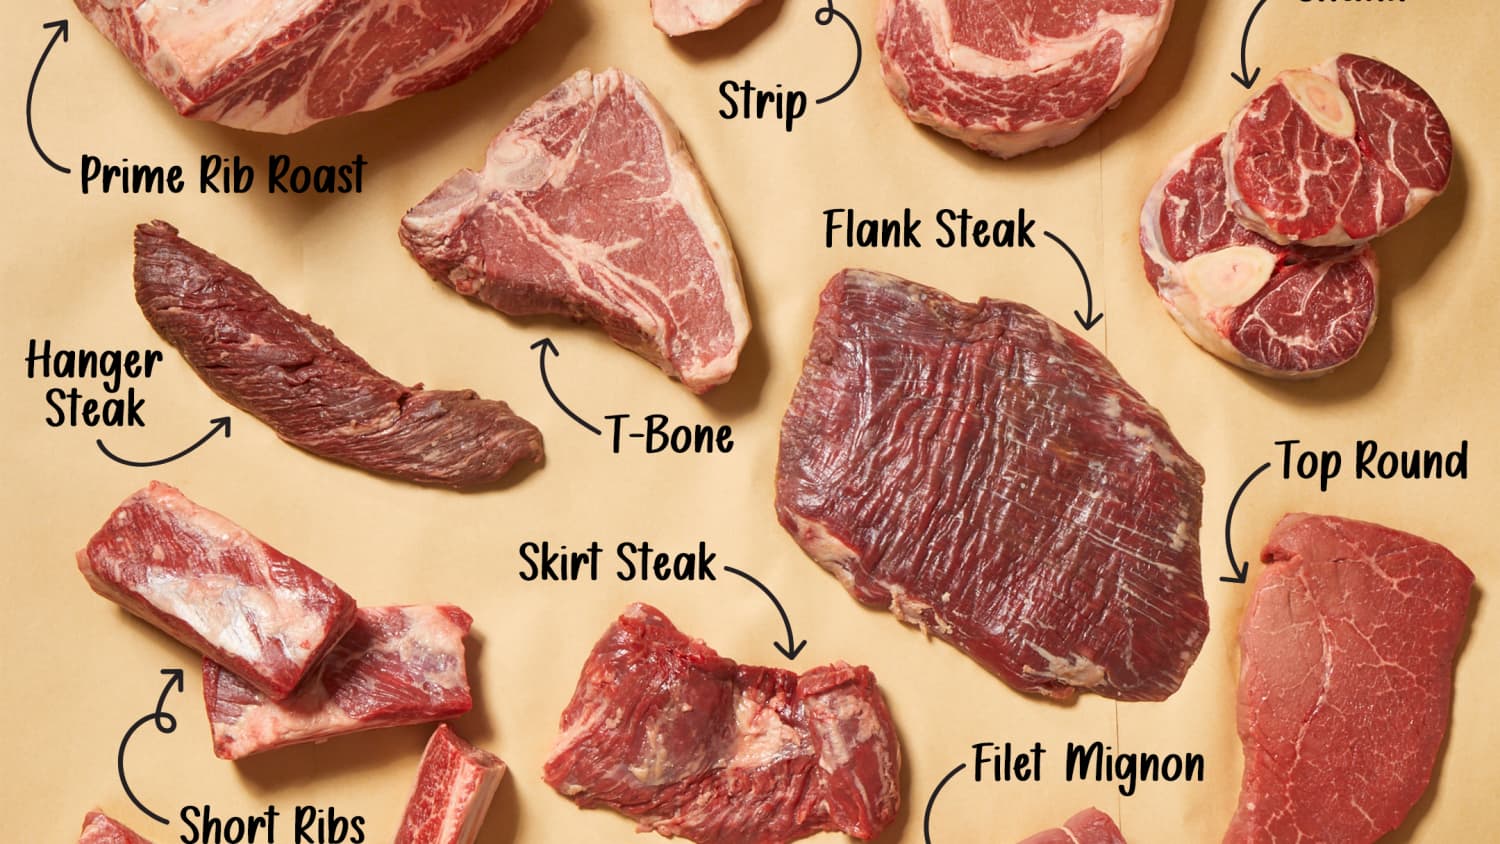 Learn What the Most Flavorful Cuts of Meat/Beef Are